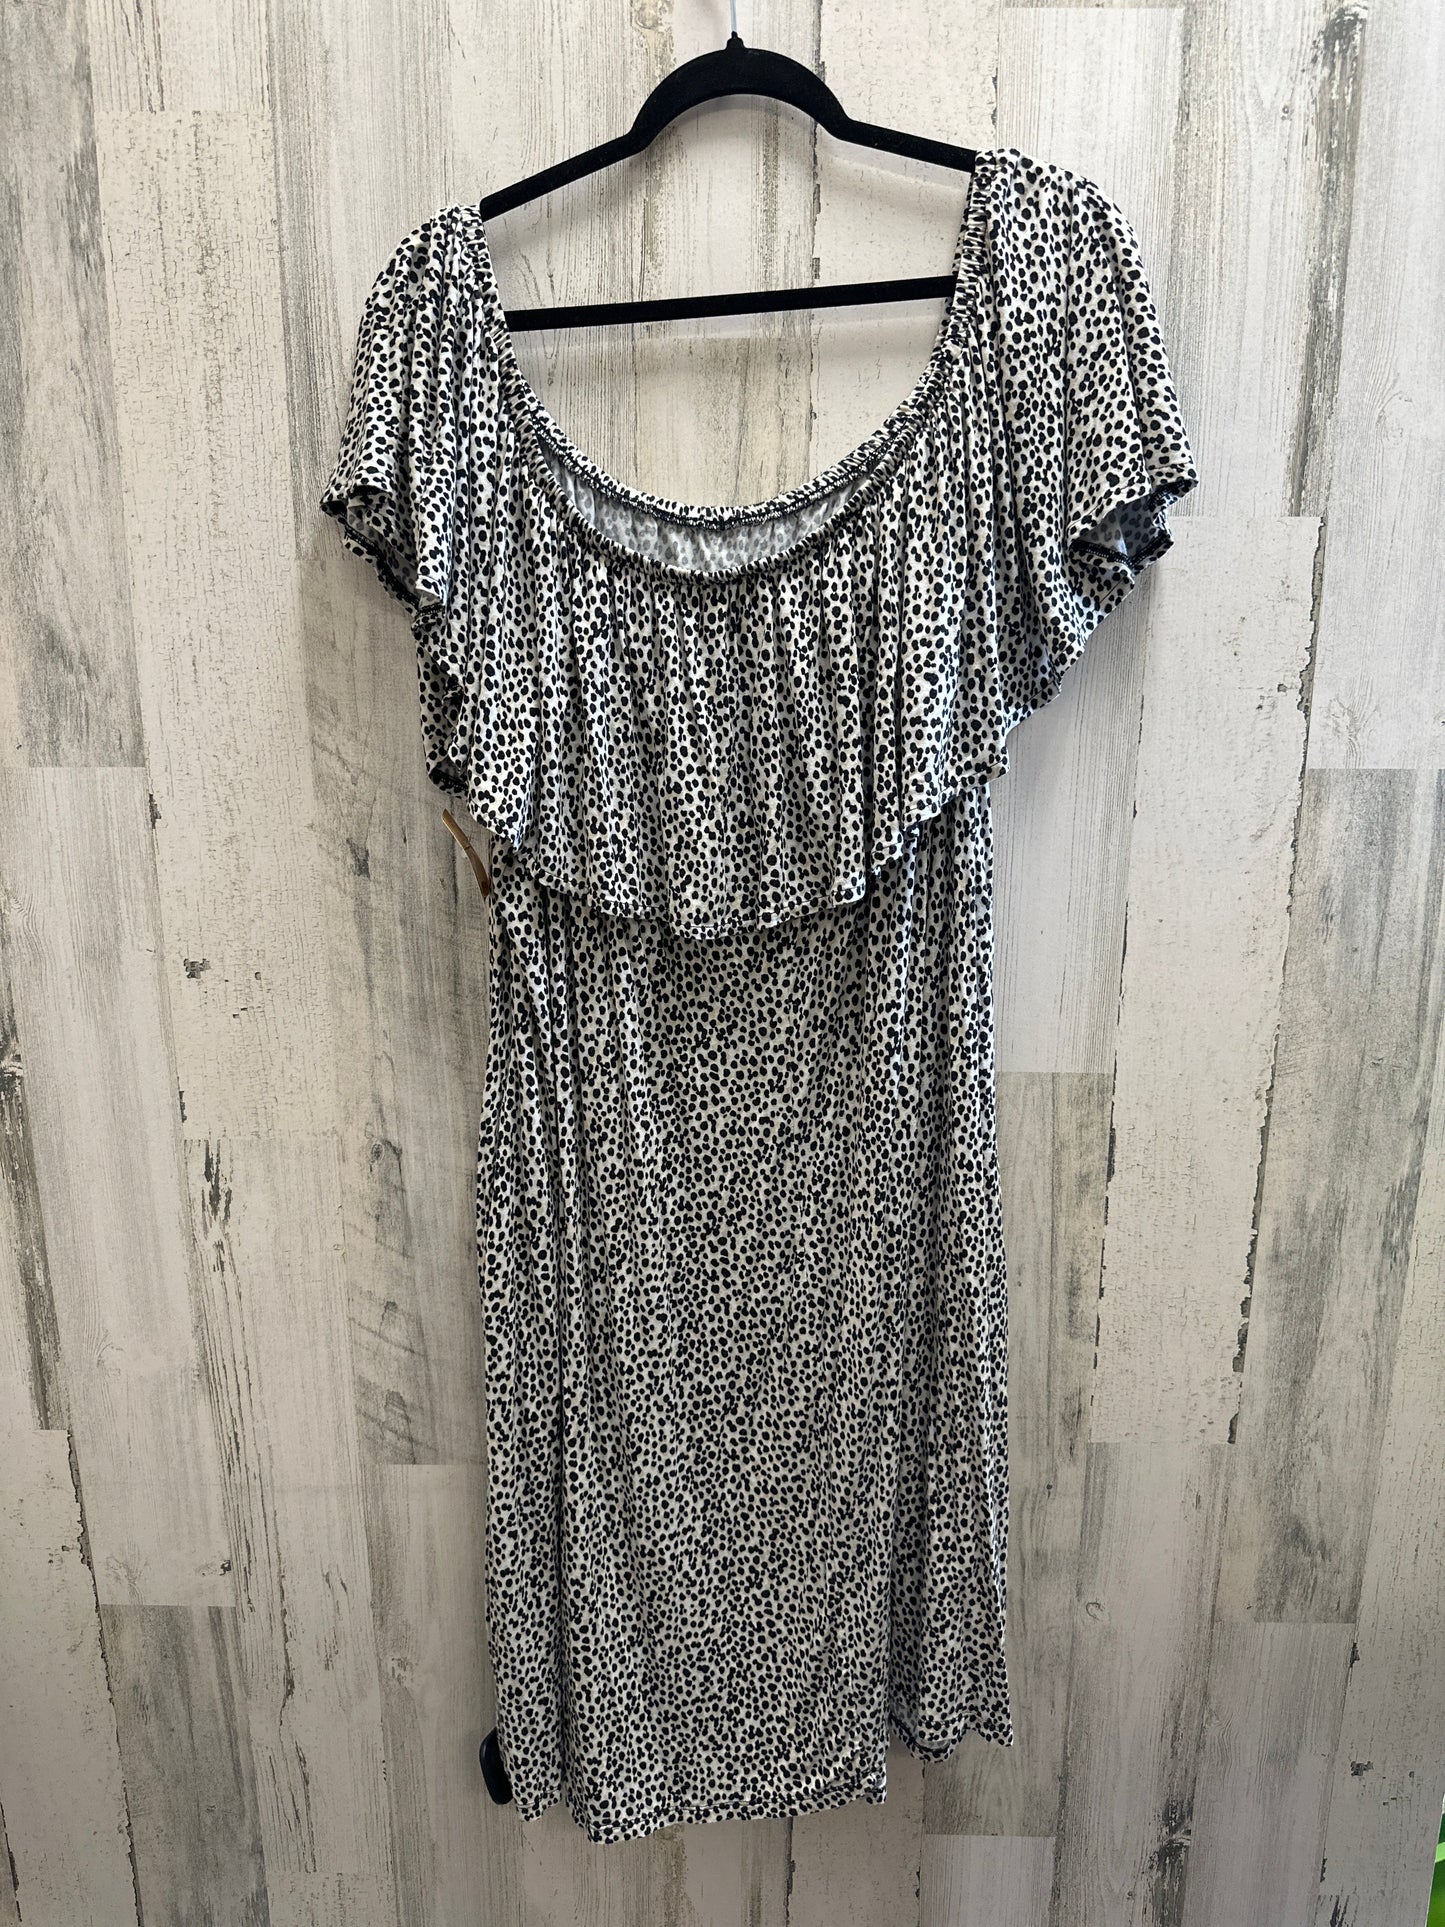 Dress Casual Short By Lane Bryant  Size: 4x